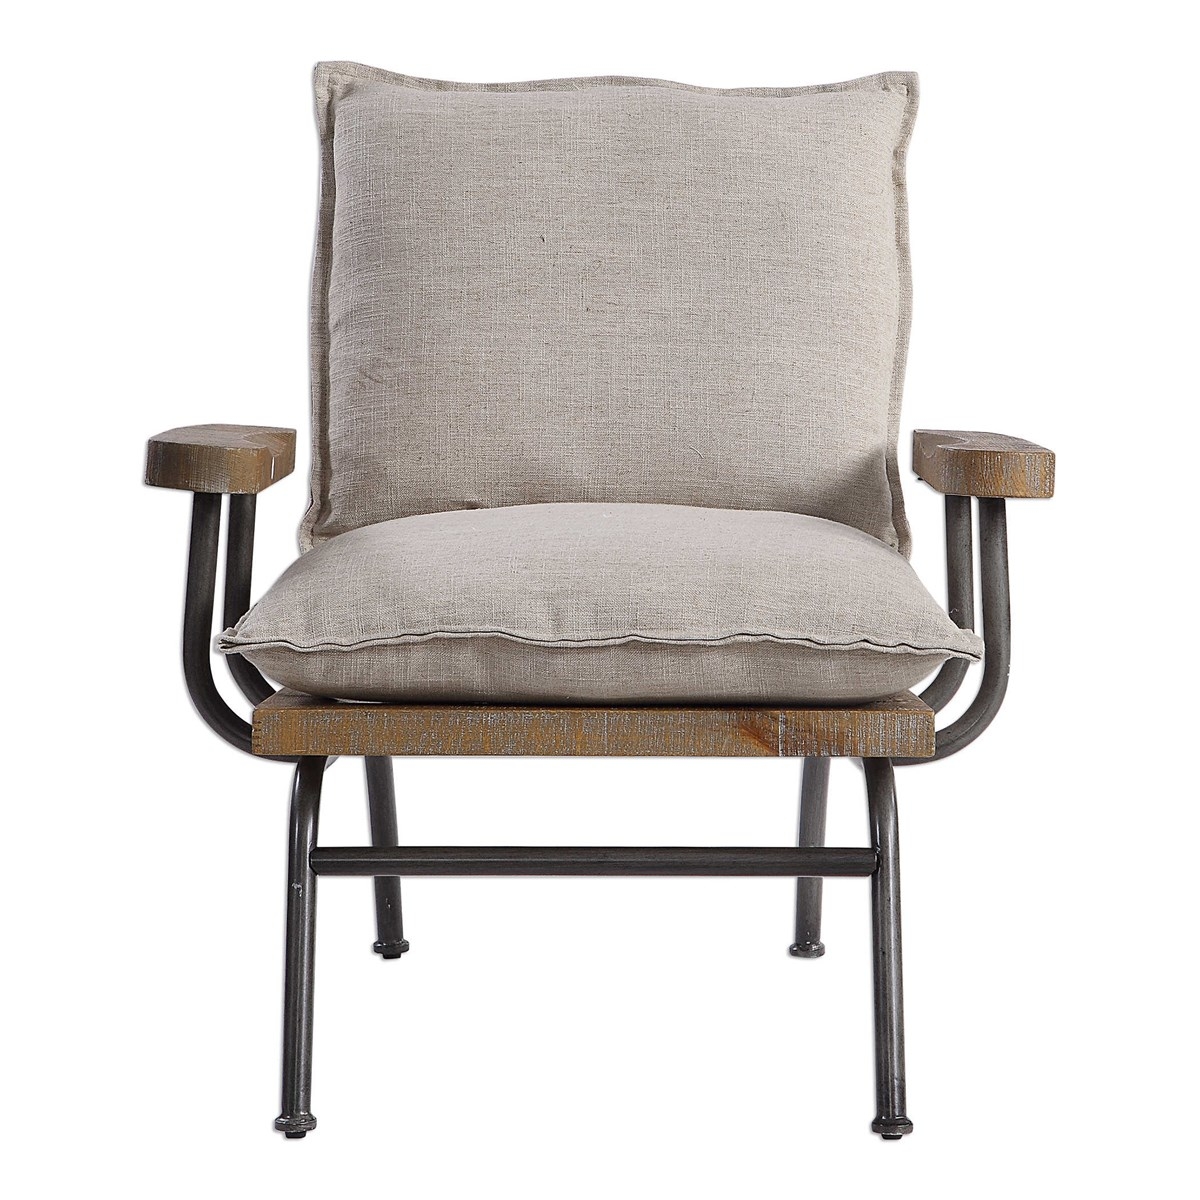 Declan Accent Chair - Image 1